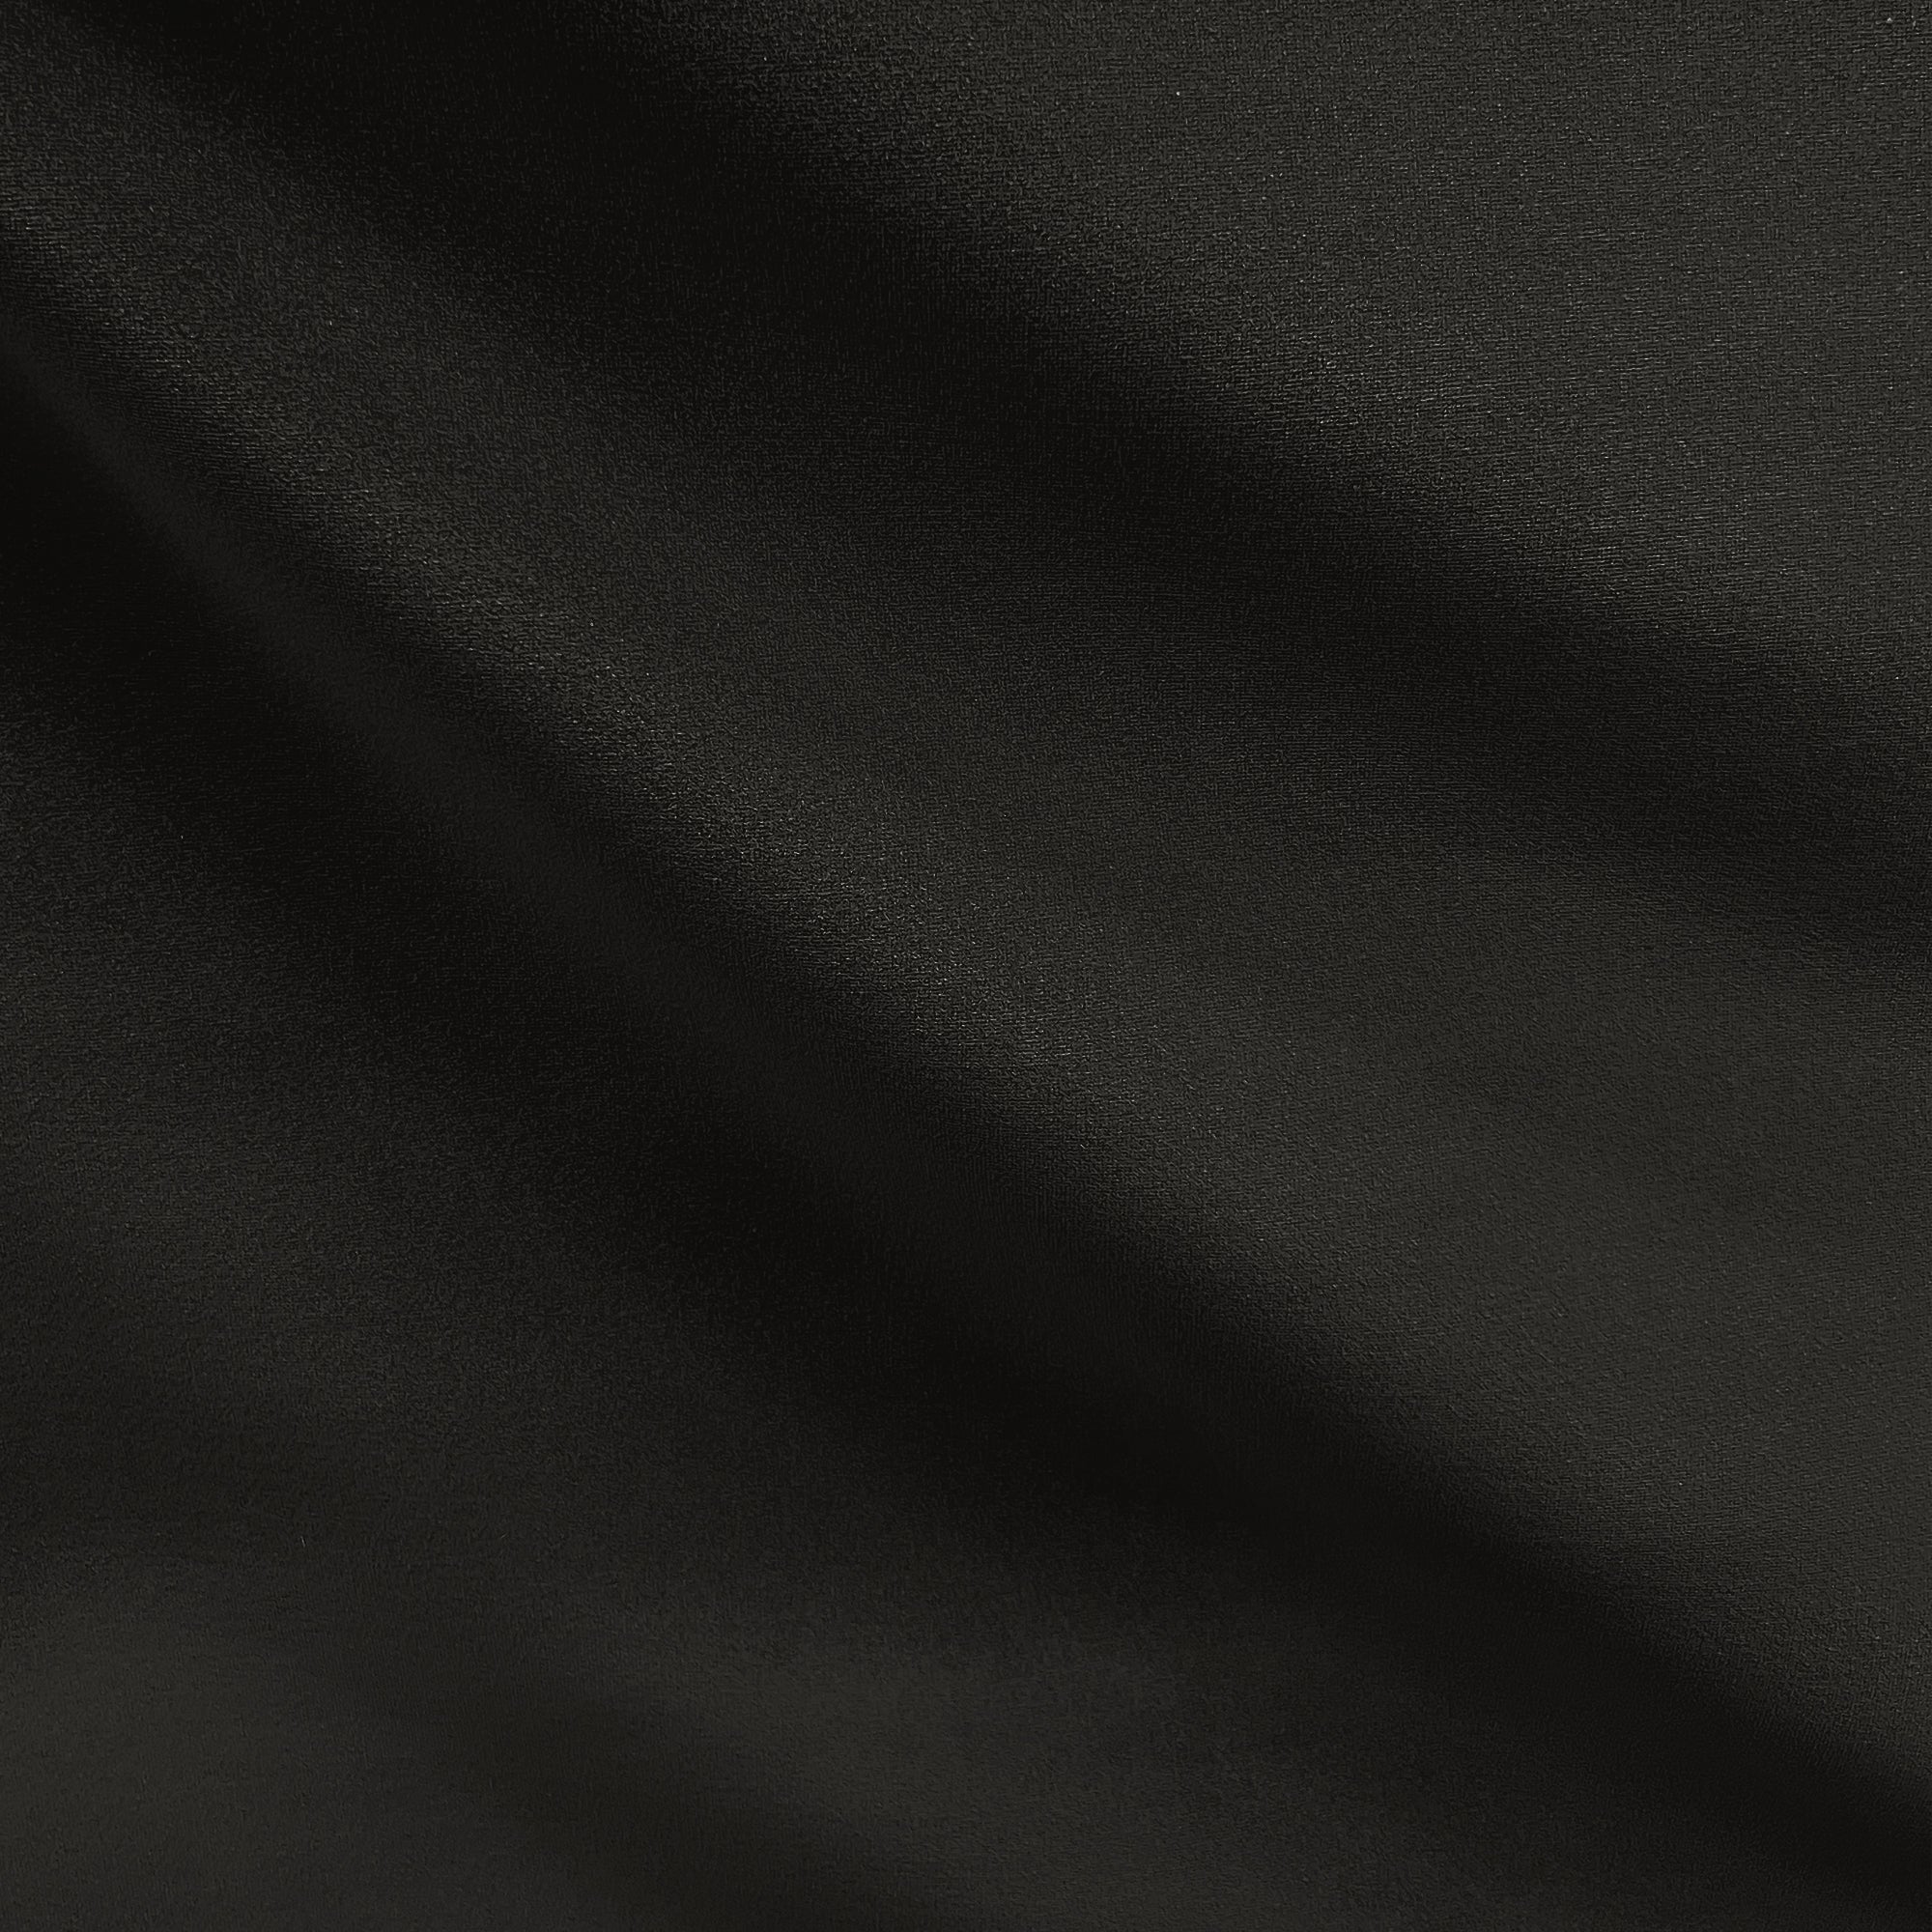  Quality Black 100% Cotton Velvet Velour Fabric for  Upholstery/Drapery/Crafts/Costumes Heavy 16oz Weight Thick Curtain Material  Sold by The Yard at 57 inch Wide : Arts, Crafts & Sewing